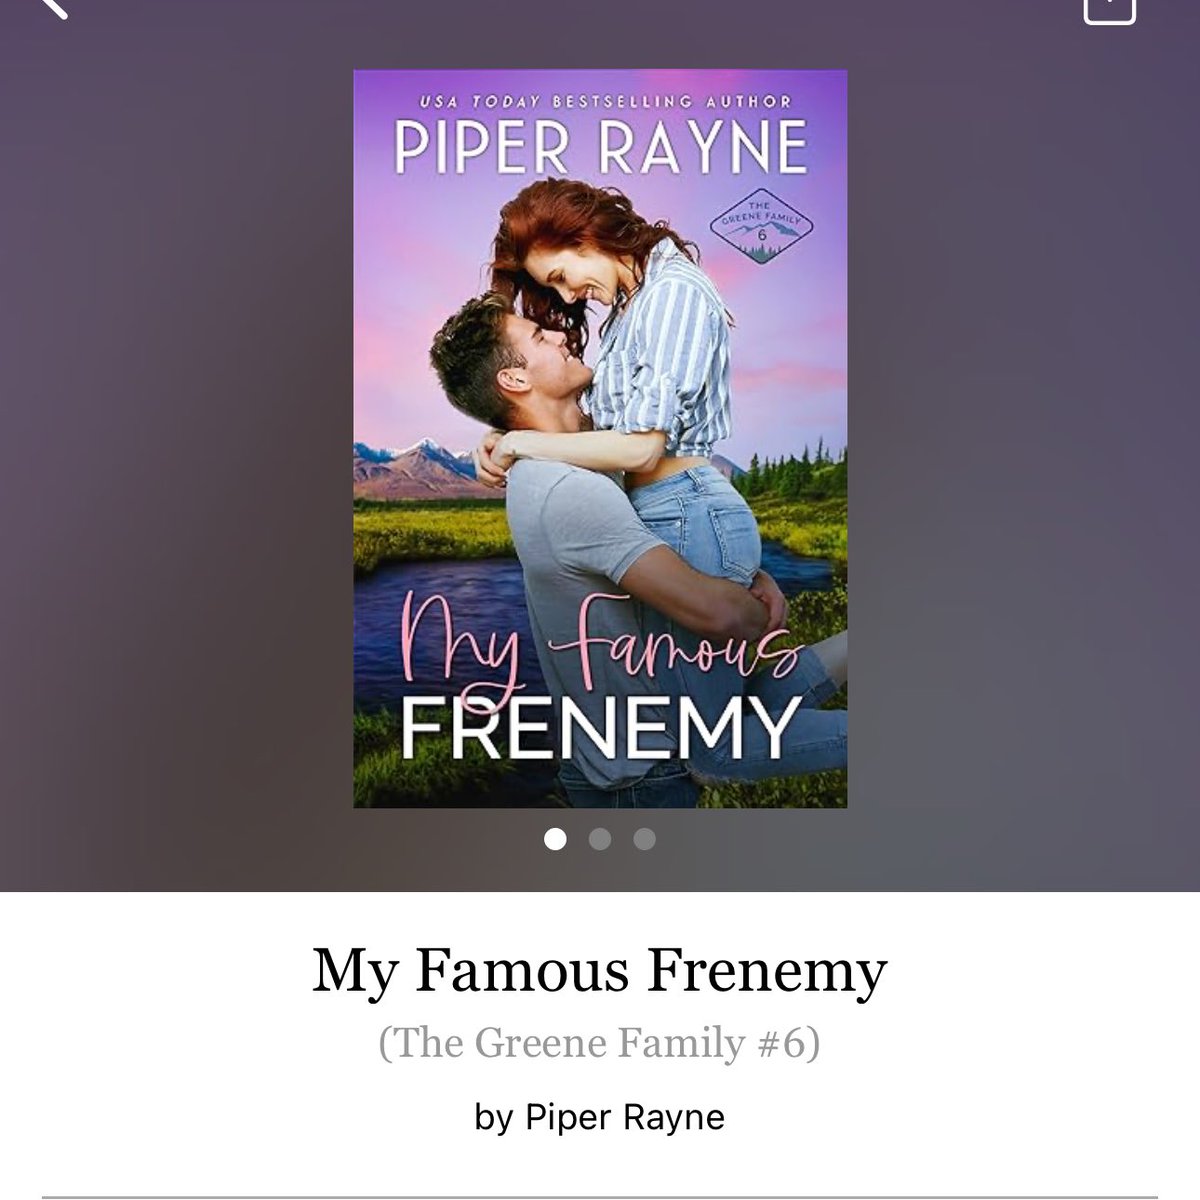 My Famous Frenemy by Piper Rayne 

#MyFamouseFrenemy by #PiperRayne #6244 #30chapters #248pages #393of400 #Series #7houraudiobook #30for8 #Audiobook #TheGreeneFamilySeries #Book6of9.5 #GavinAndposey #SunriseBay #april2024 #clearingoffreadingshelves #whatsnext #readitquick